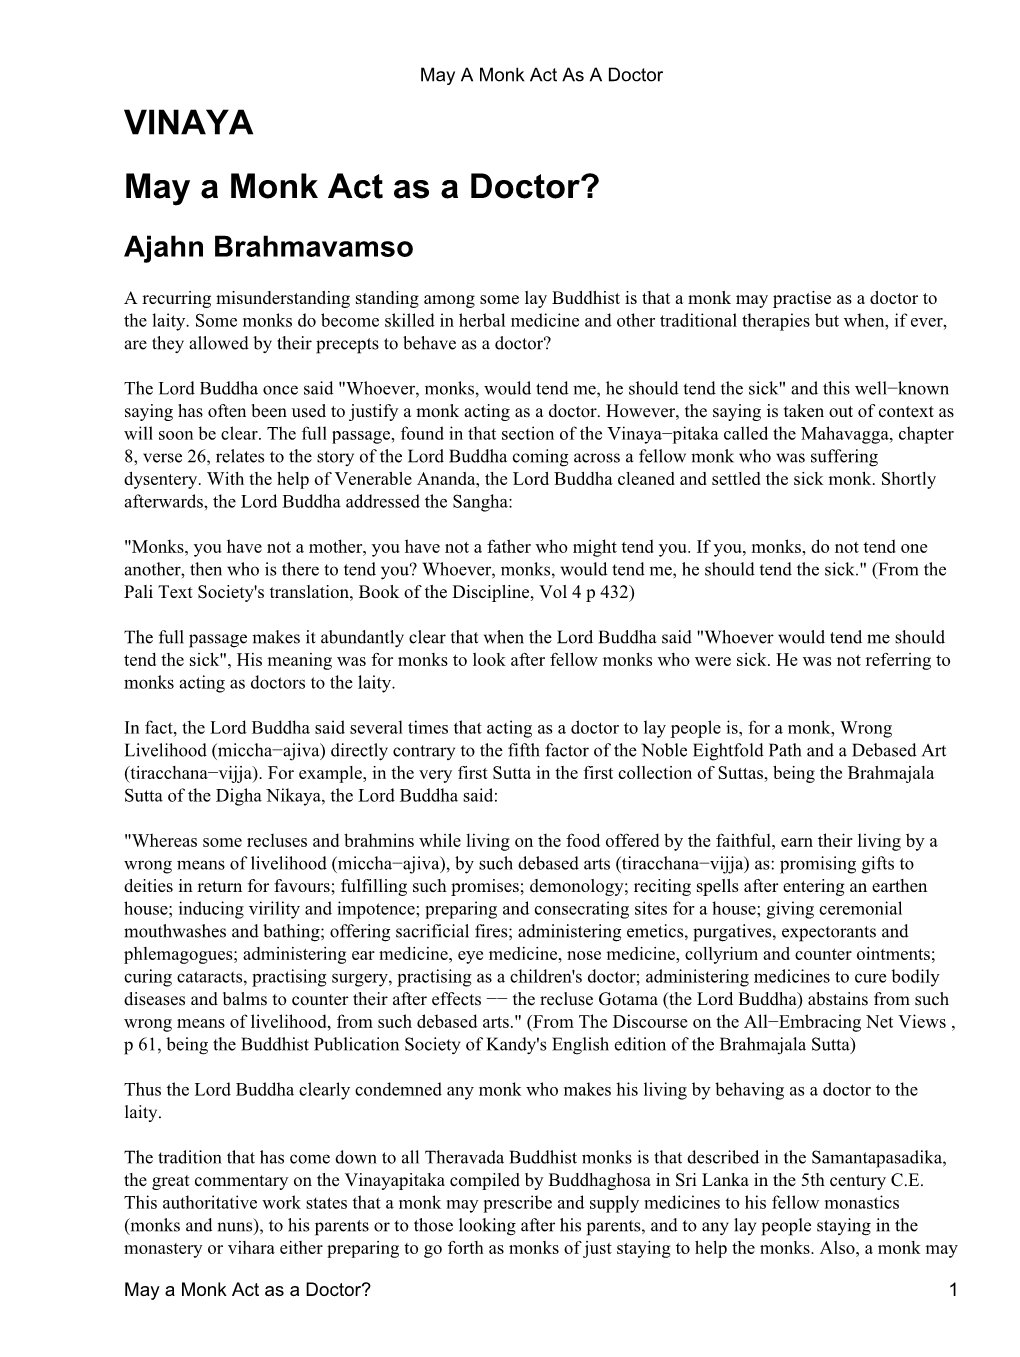 May a Monk Act As a Doctor.Pdf